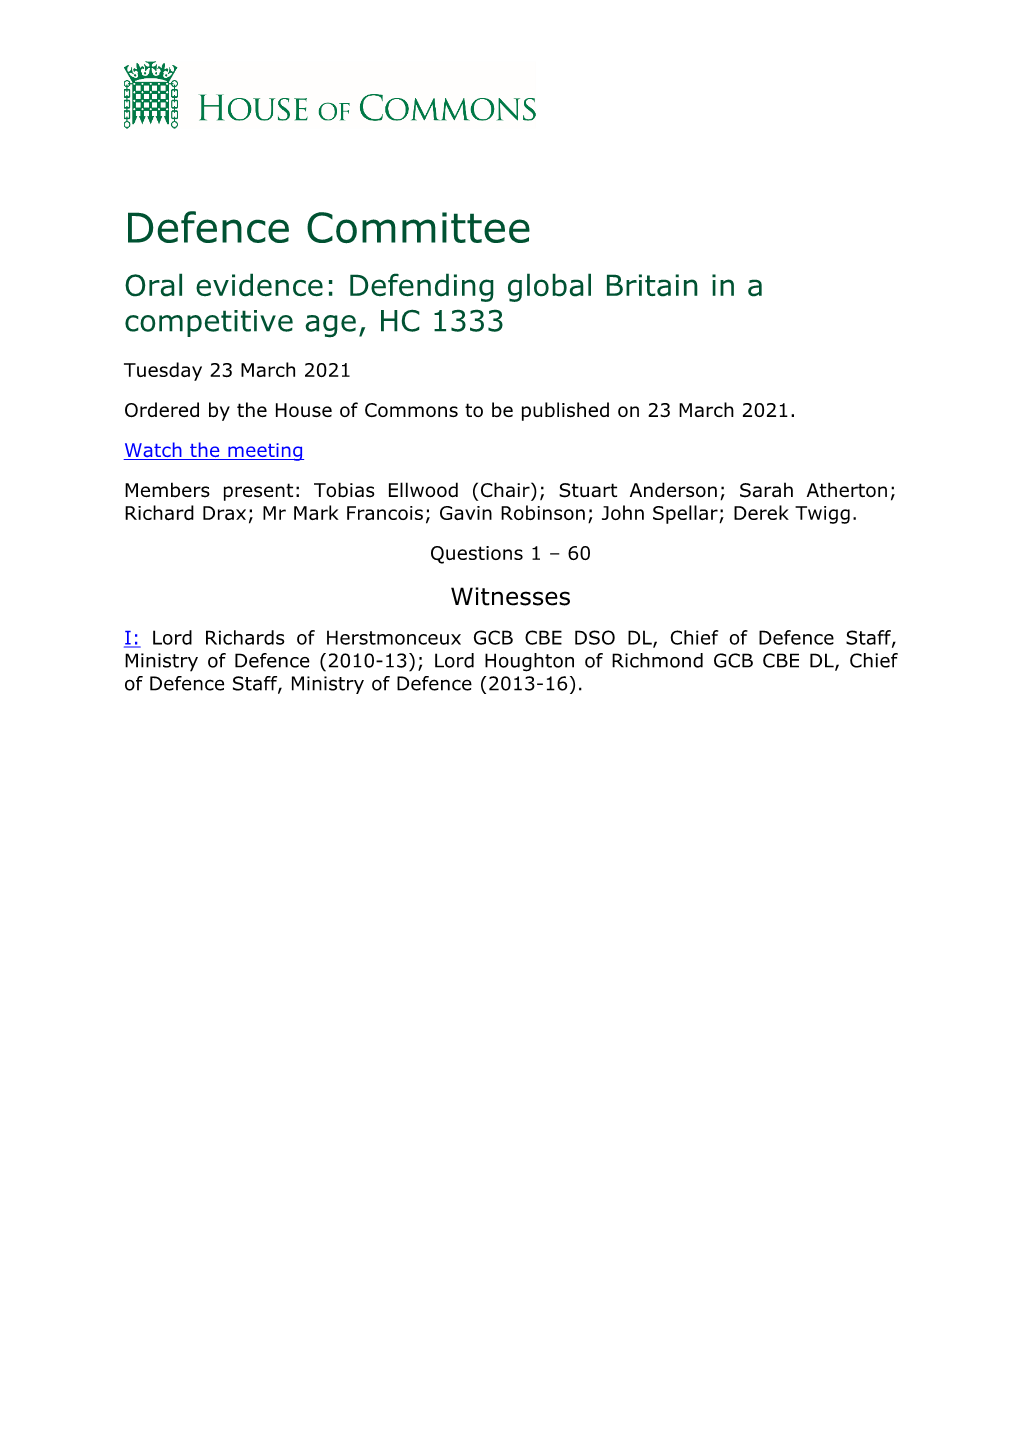 Defence Committee Oral Evidence: Defending Global Britain in a Competitive Age, HC 1333